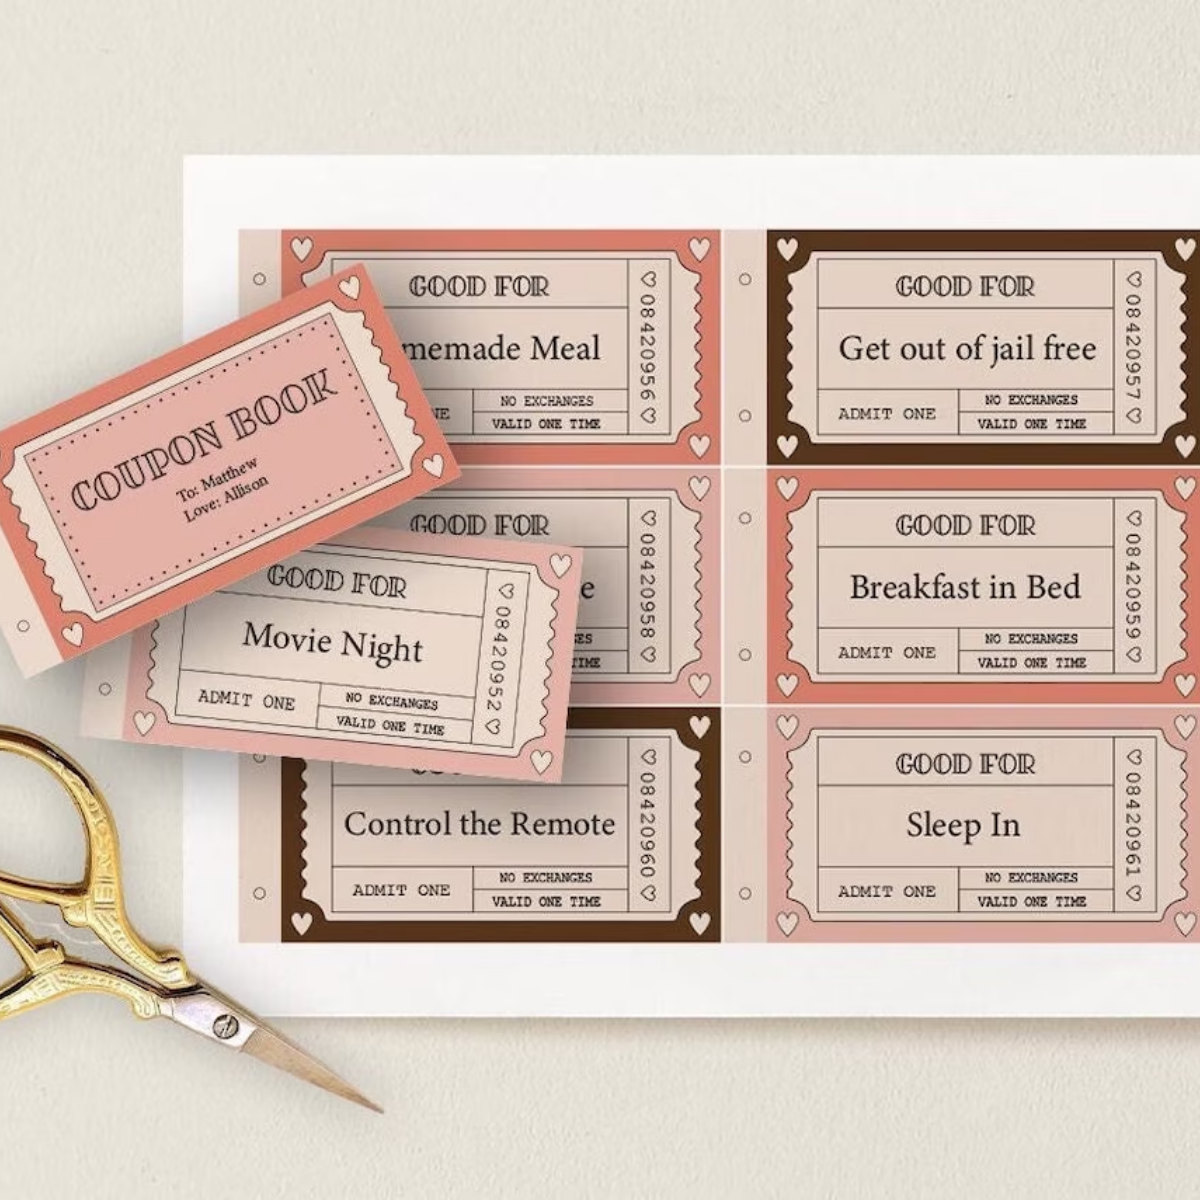 19. Love Coupons: A Unique and Personalized Anniversary Gift Idea for Him